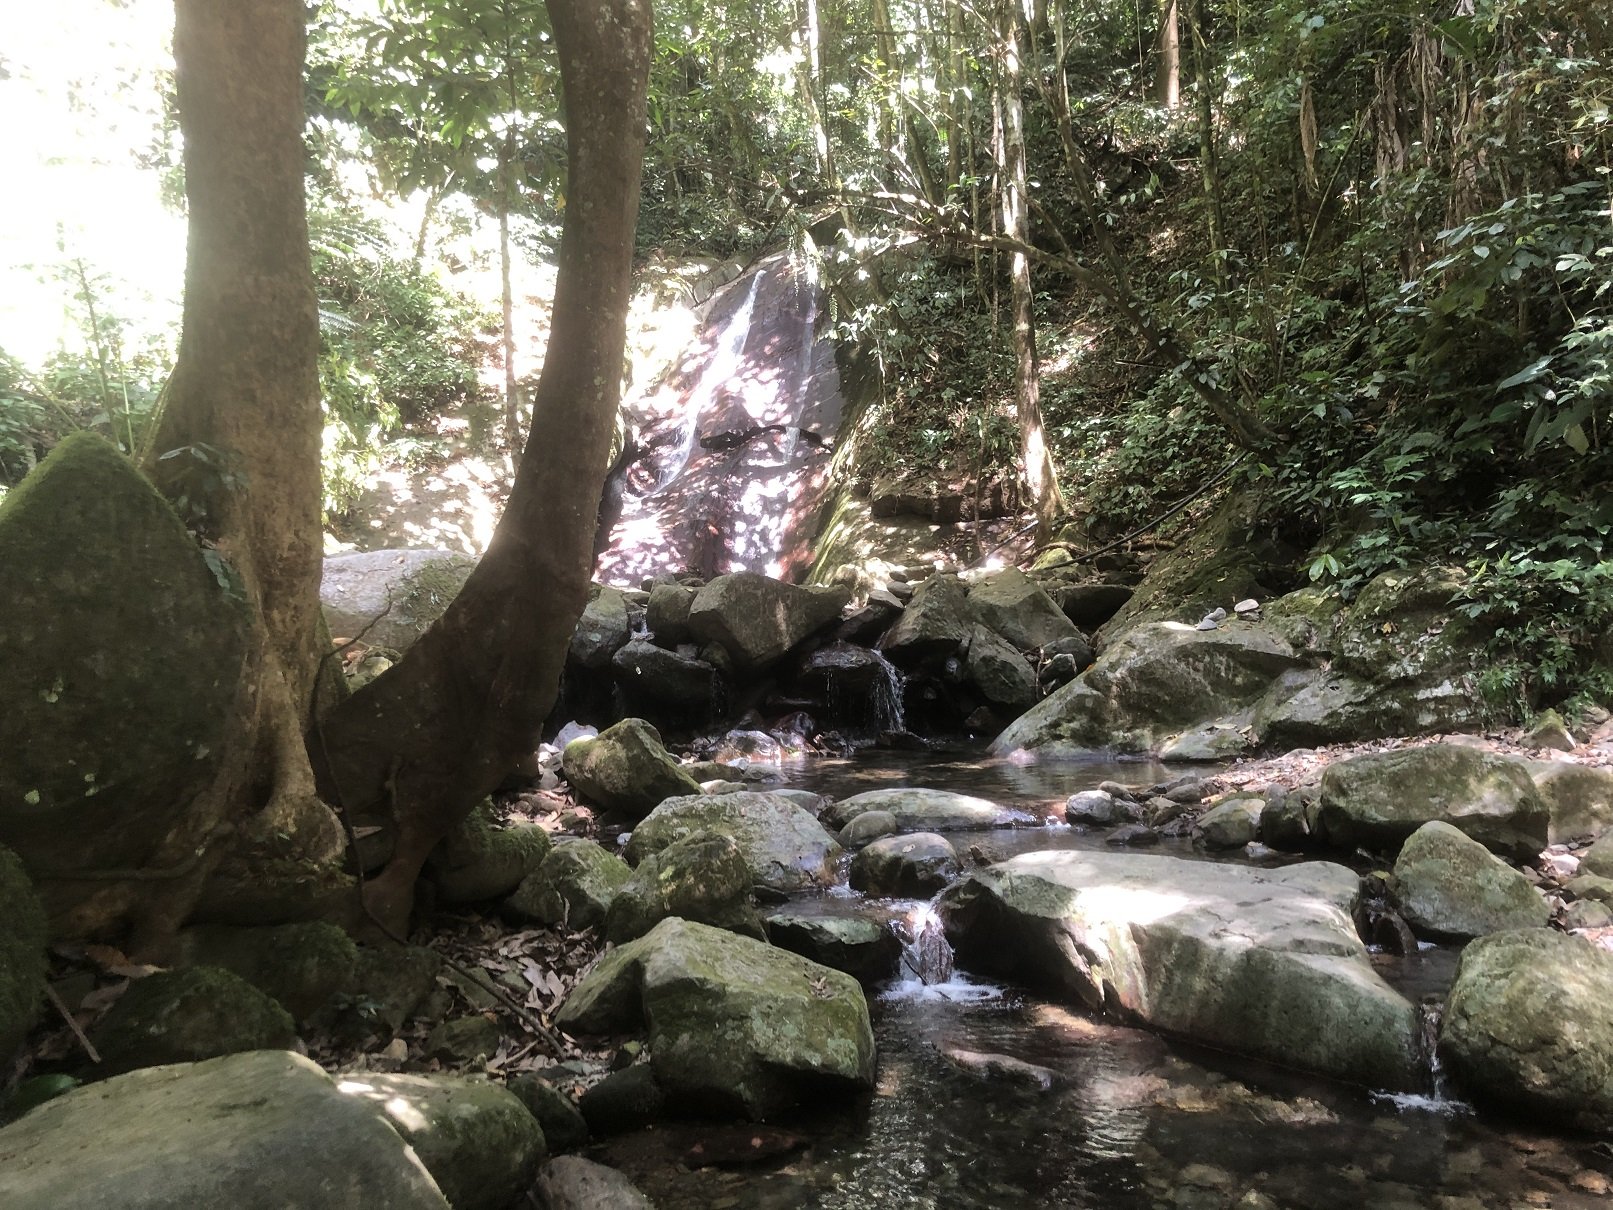 Trekking at Poring Hot Spring: Time to test your stepping-stone skills!